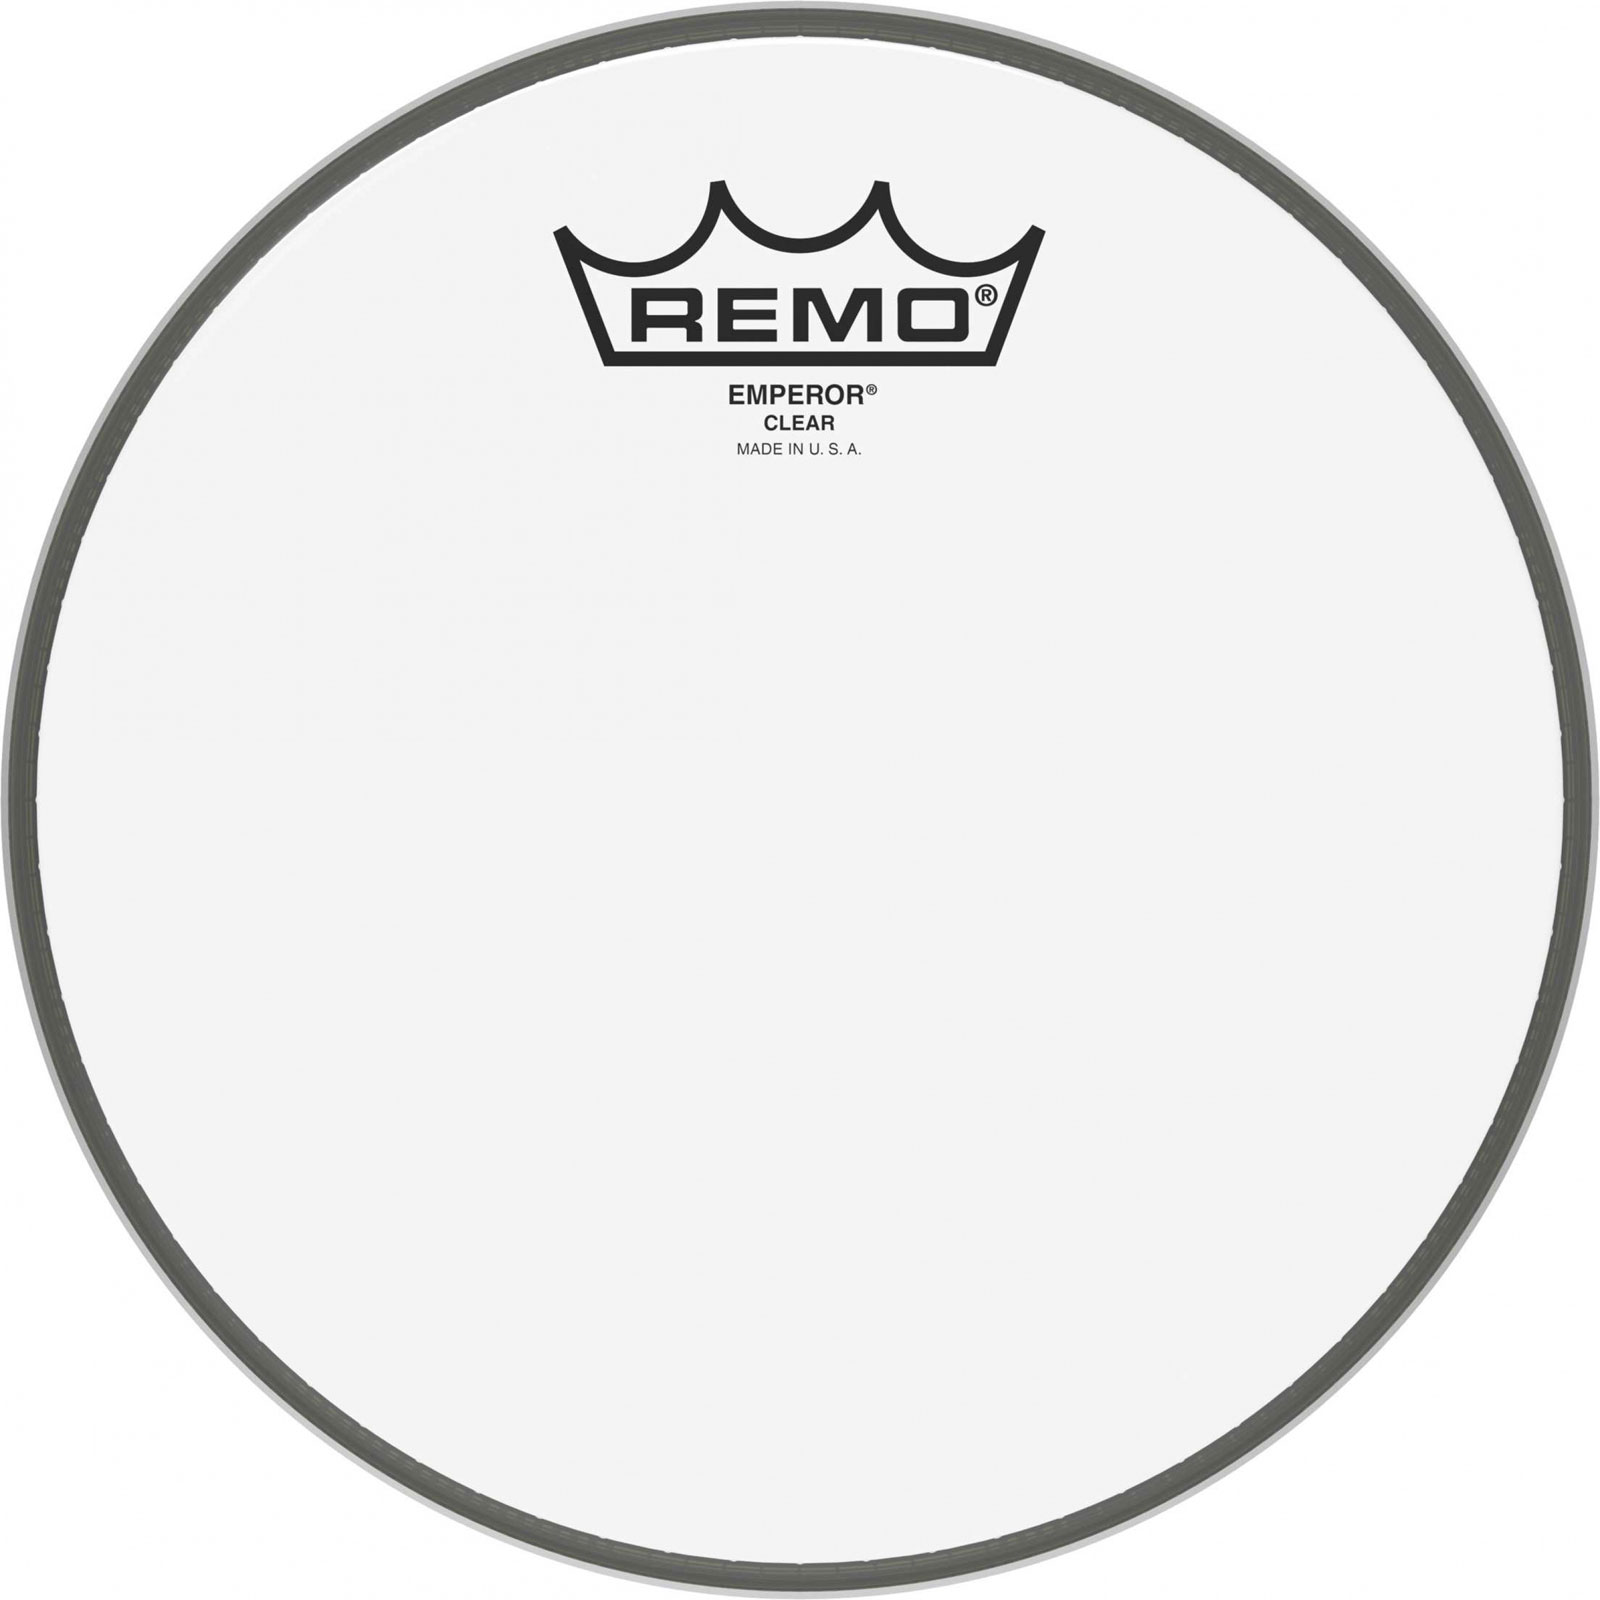 REMO EMPEROR 8 - CLEAR - BE-0308-00